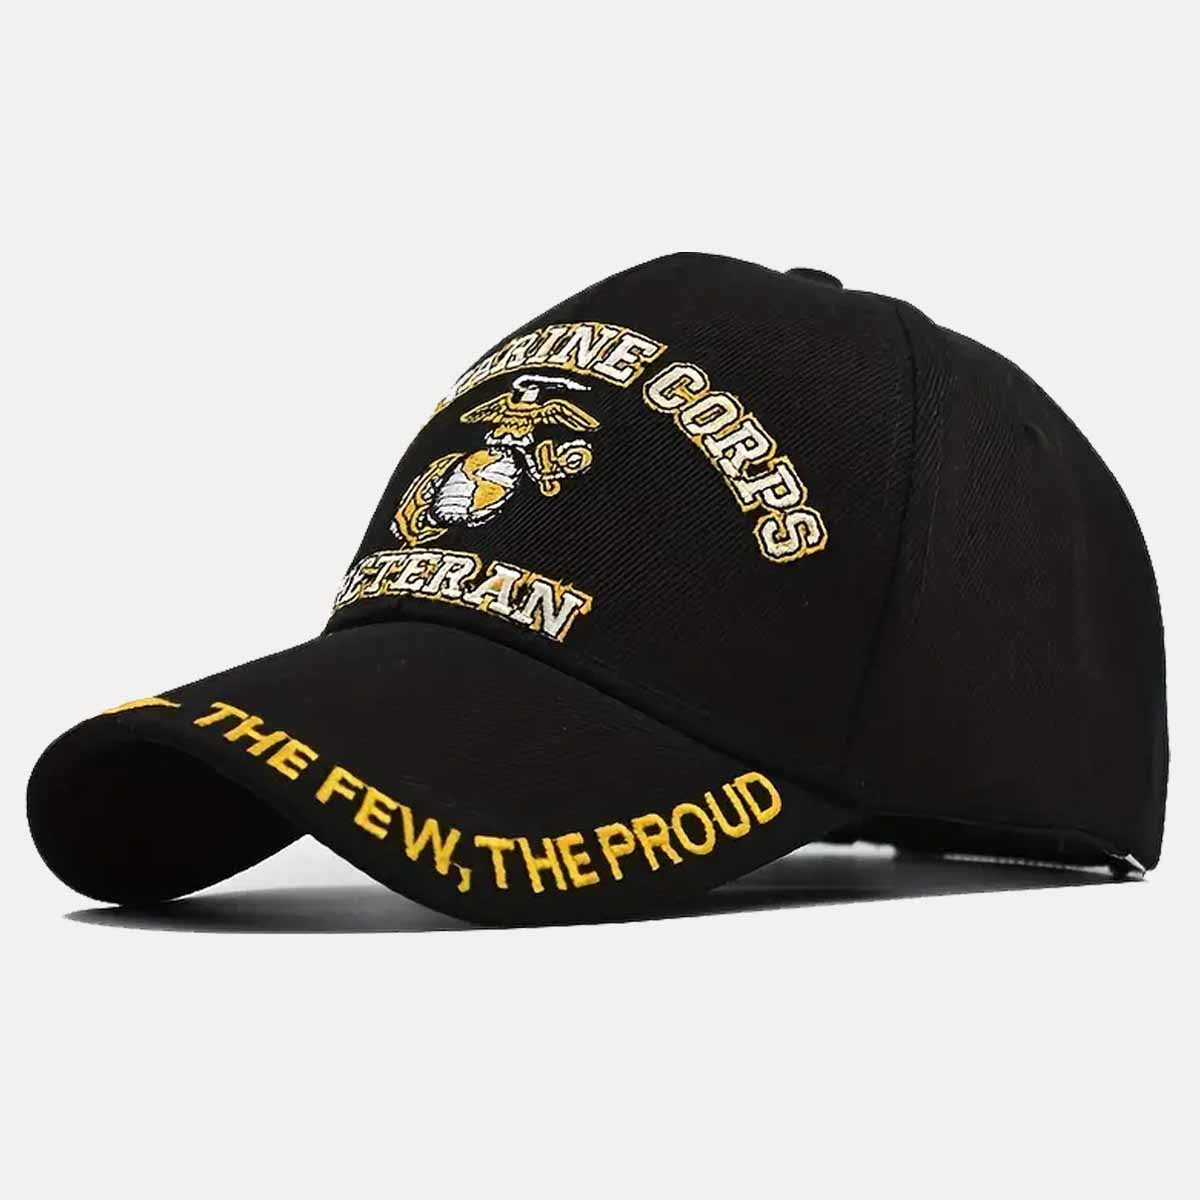 Marine Corps Veteran 3D Embroidery high-quality embroidered black and Gold baseball cap.. American Outfitters Patriot Apparel. The American Clothing Company. Patriot Gear USA